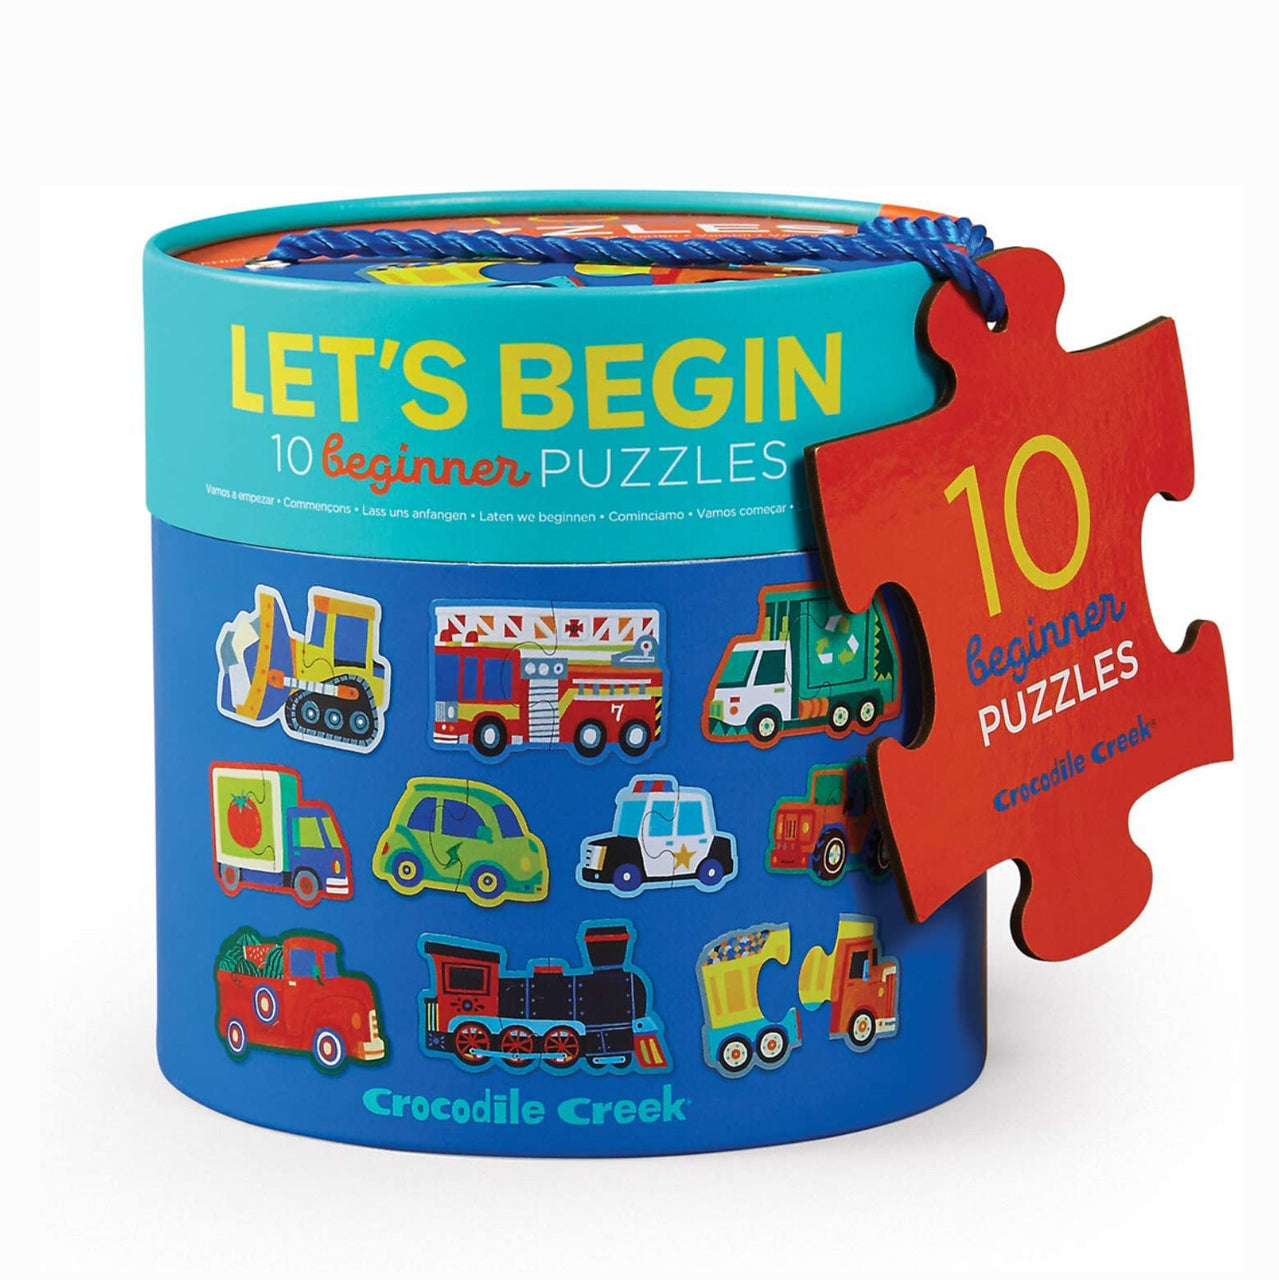 Crocodile Creek's Vehicles puzzle contains ten different 2-piece puzzles of illustrated vehicles, including a bulldozer, fire engine, delivery truck, police car, train, recycling truck and more! The pieces are colour coded on the back for easy sorting and colour matching. This puzzle includes a brilliant storage canister with a rope handle!